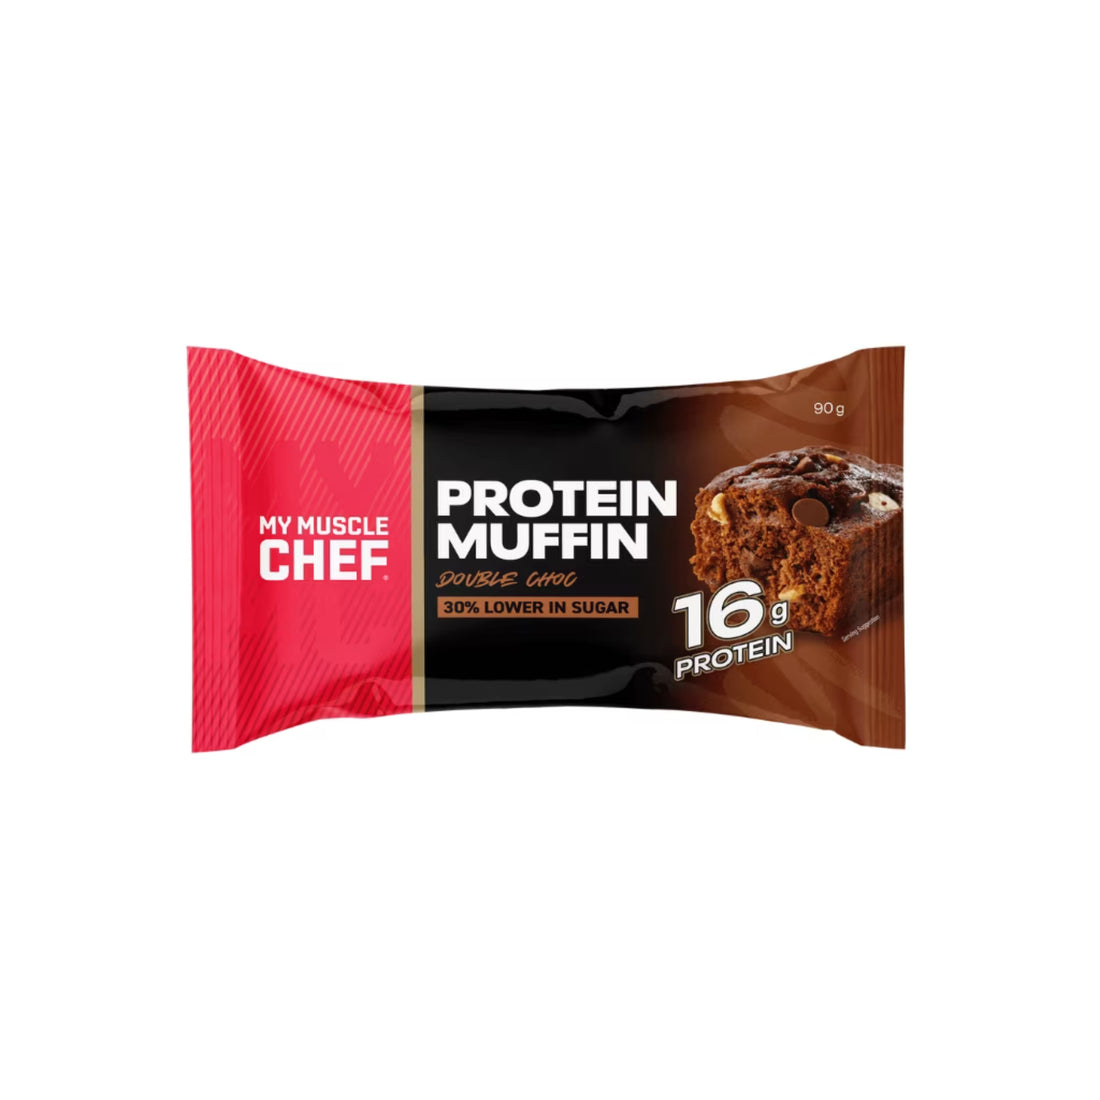 My Muscle Chef Protein Muffin - Double Choc